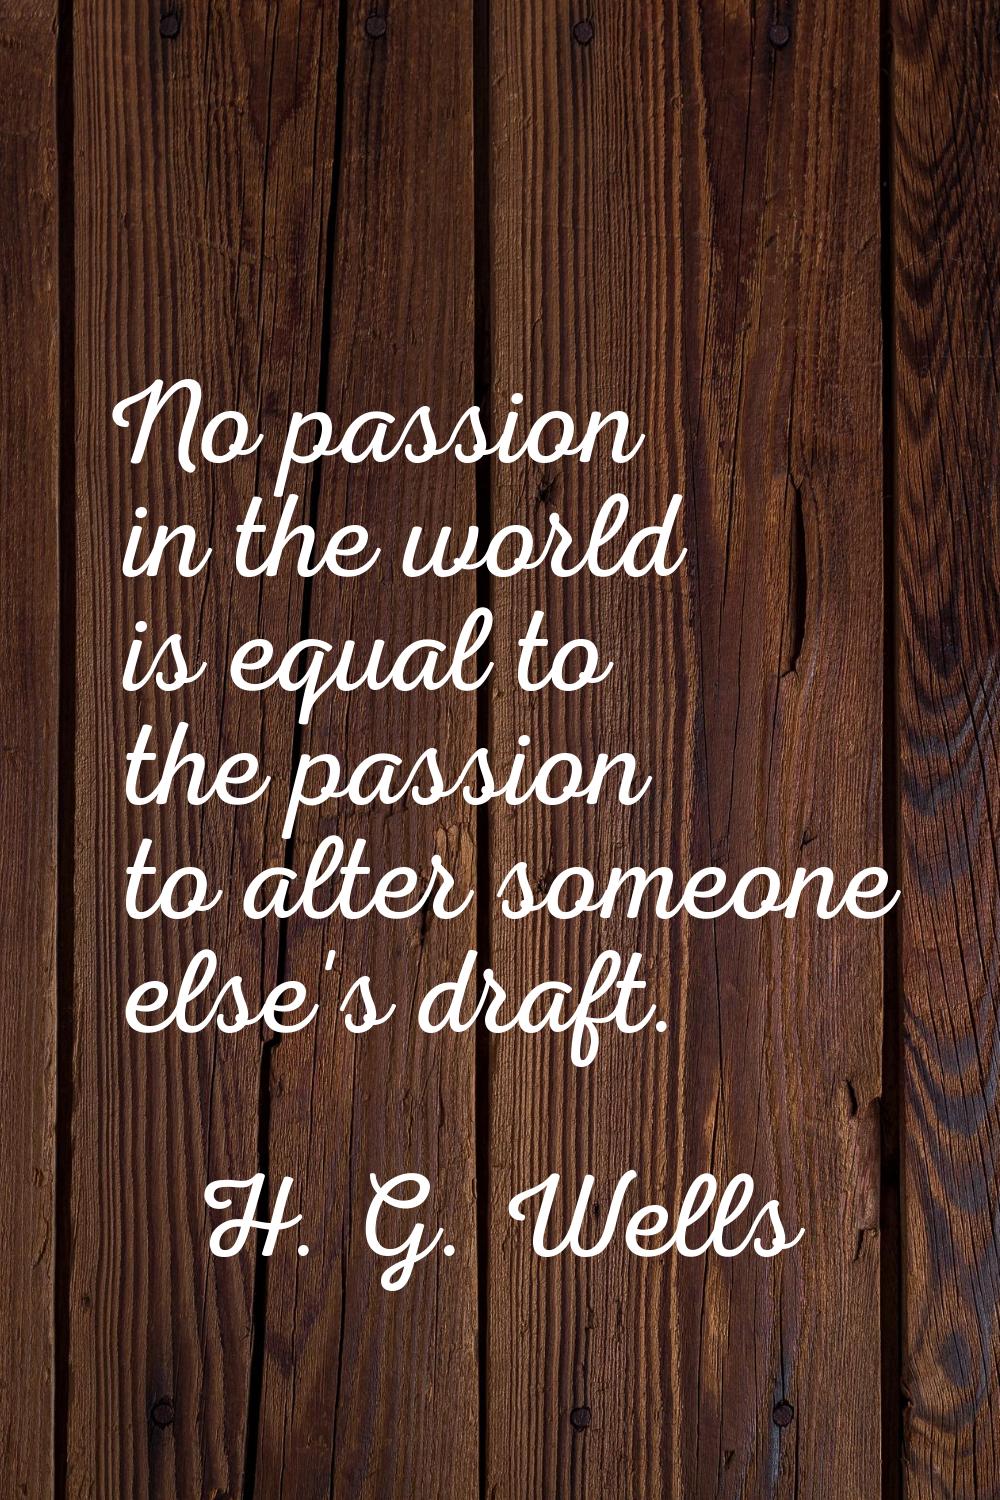 No passion in the world is equal to the passion to alter someone else's draft.